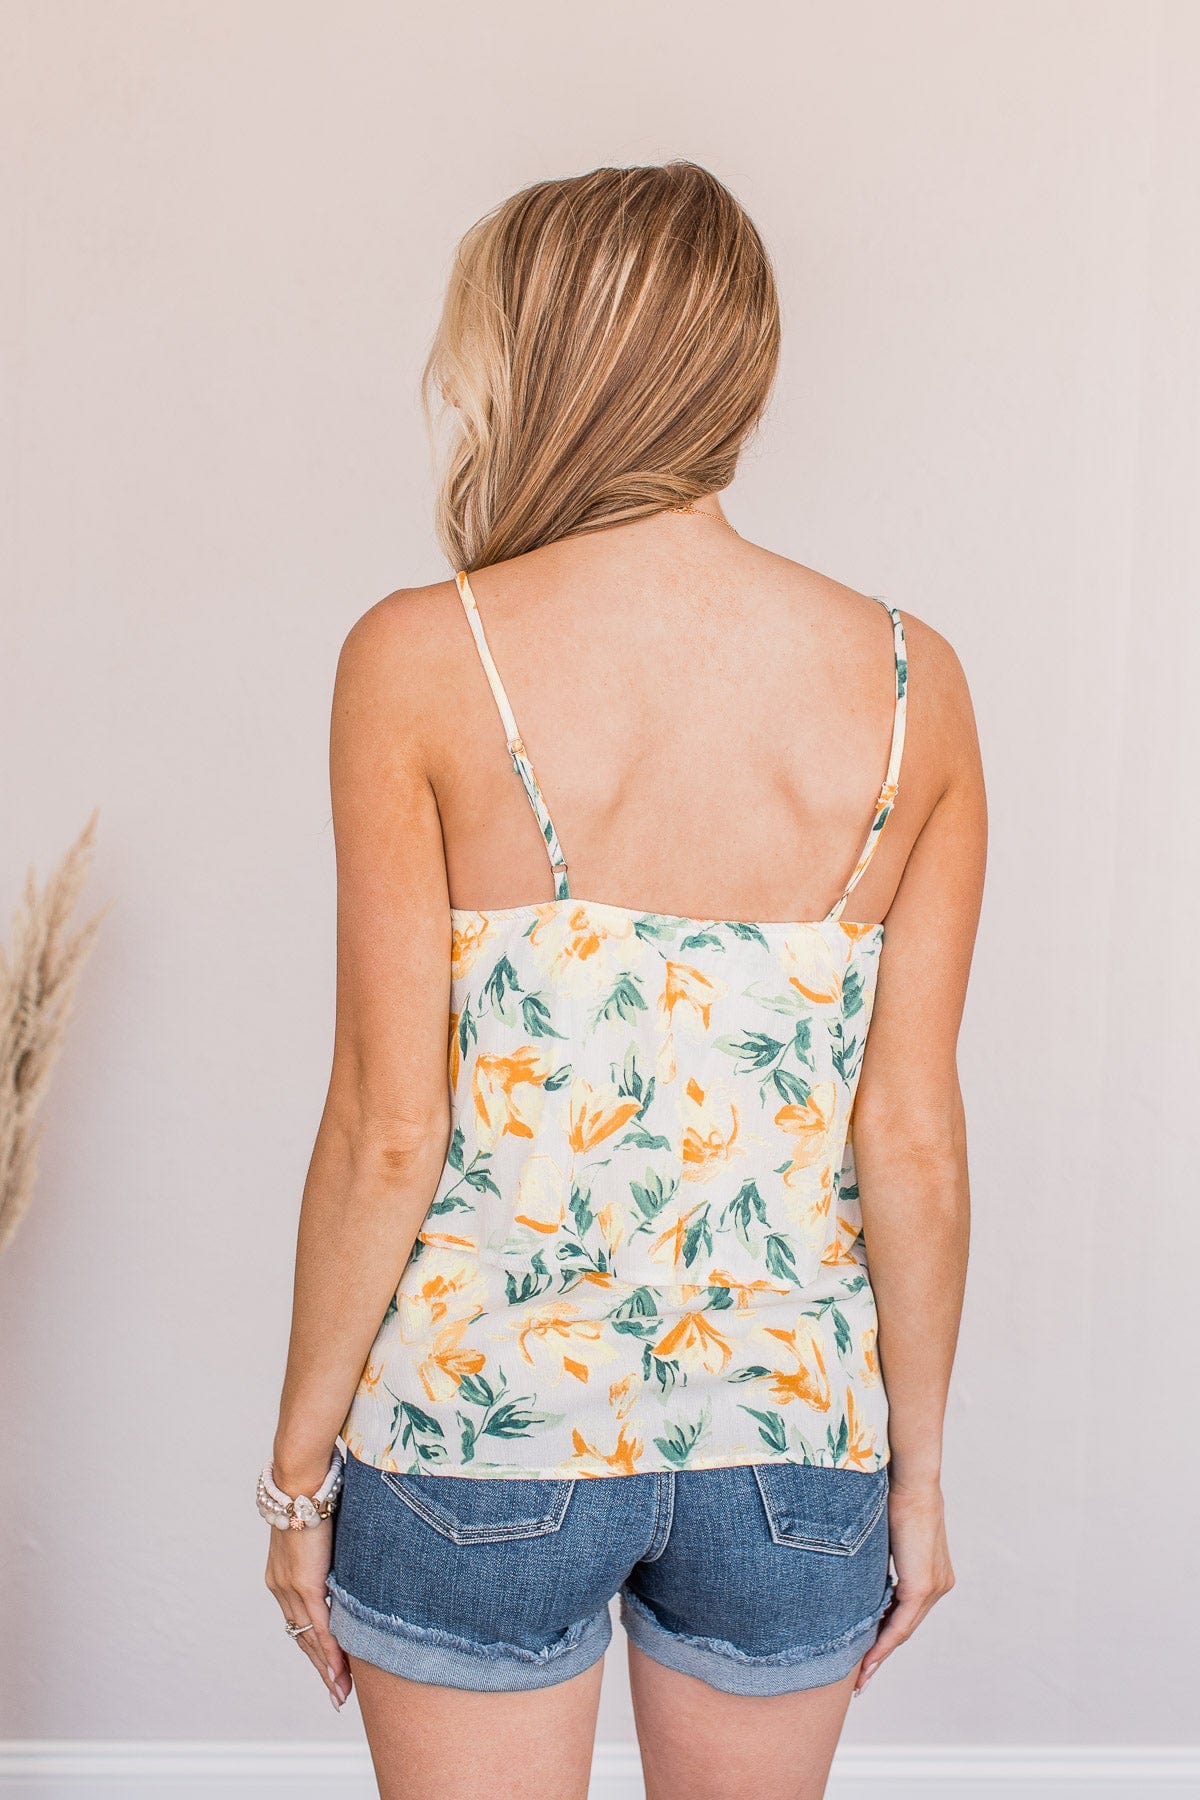 Delightful Daffodils Floral Tank- Ivory